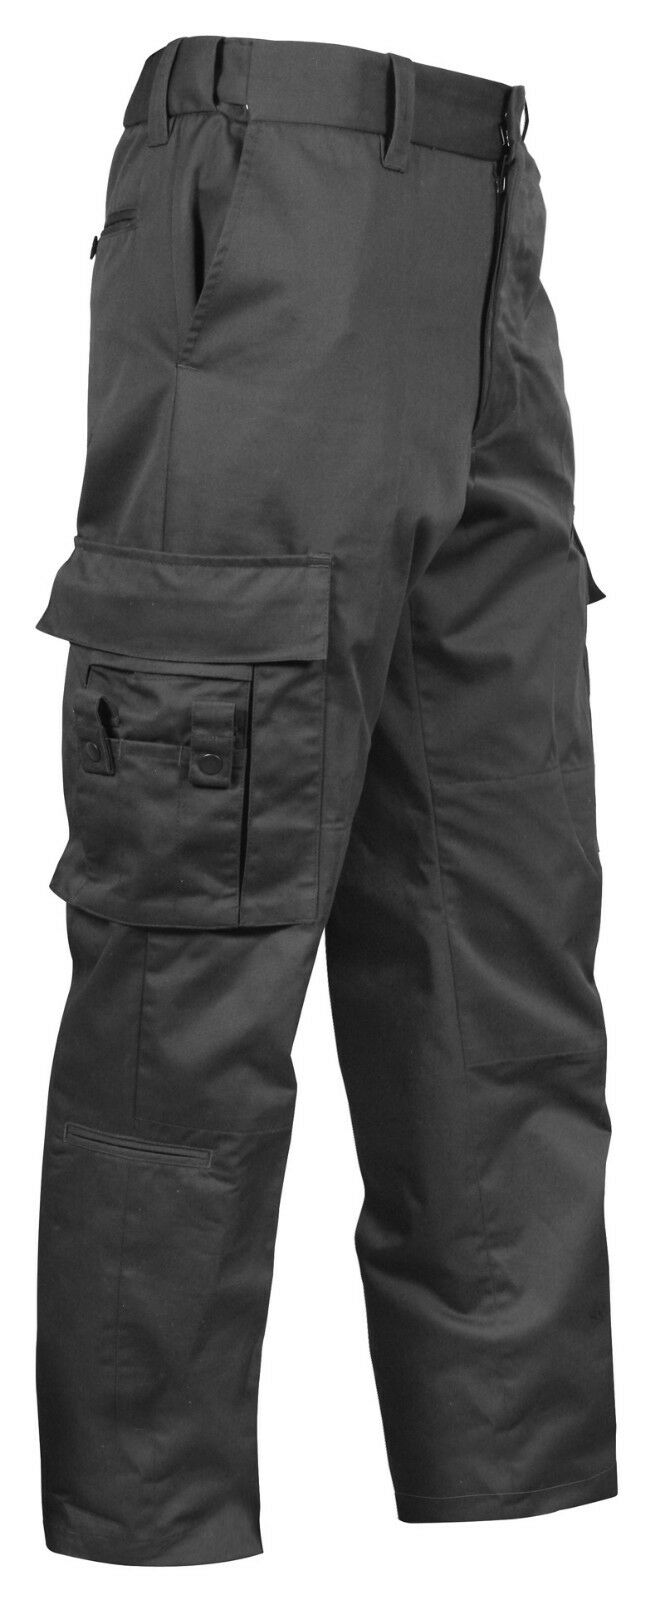 Rothco Deluxe EMT (Emergency Medical Technician) Paramedic Pants - Black